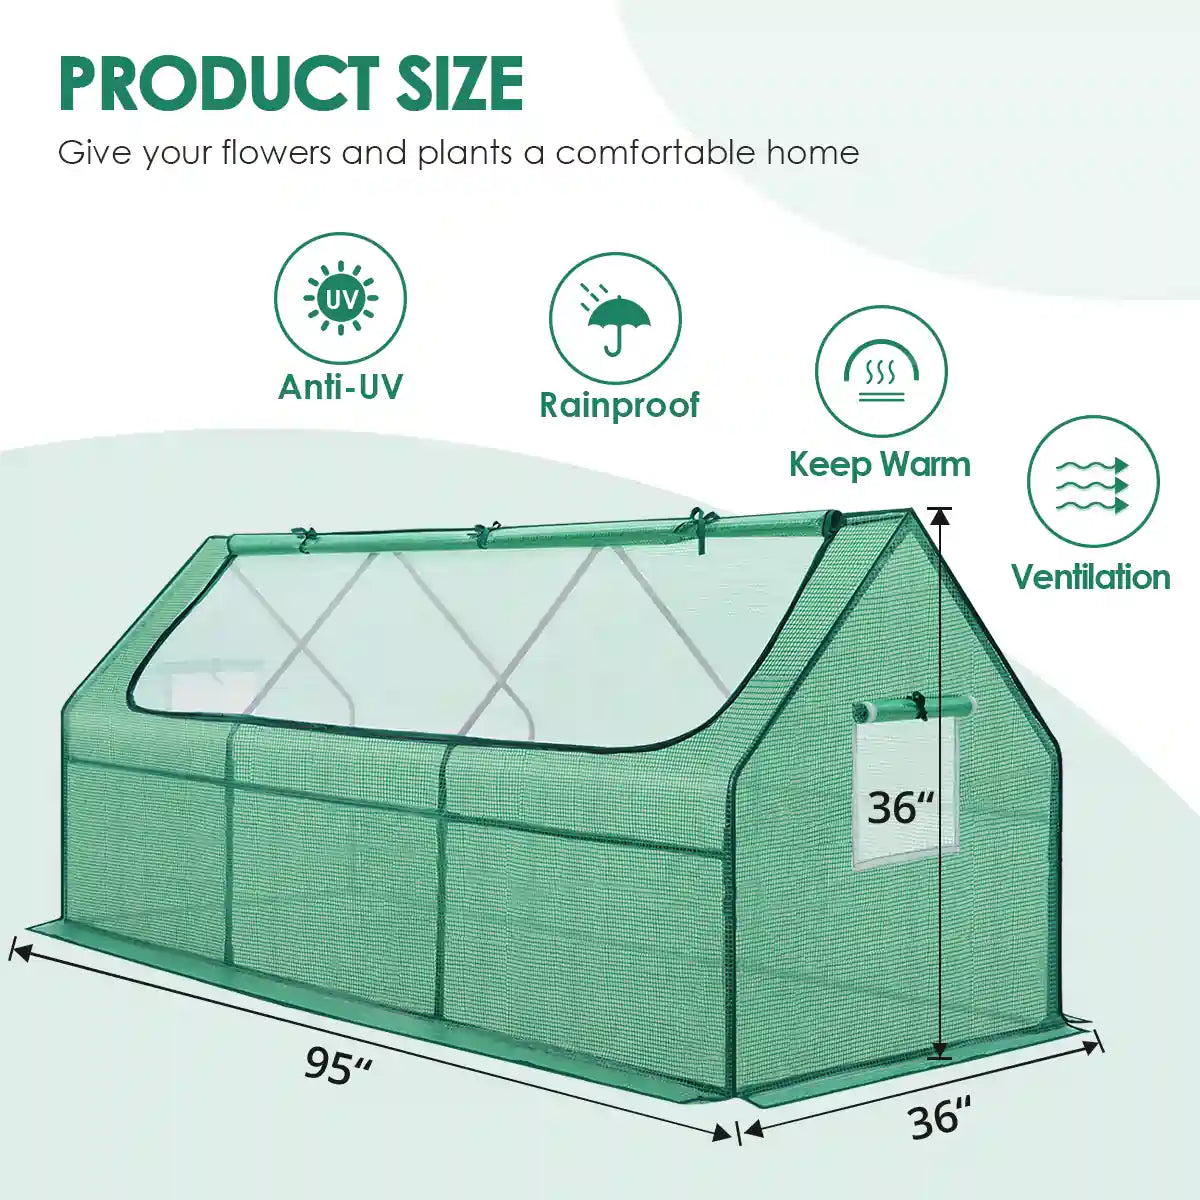 95“x36”x36“ greenhouse size#color_green